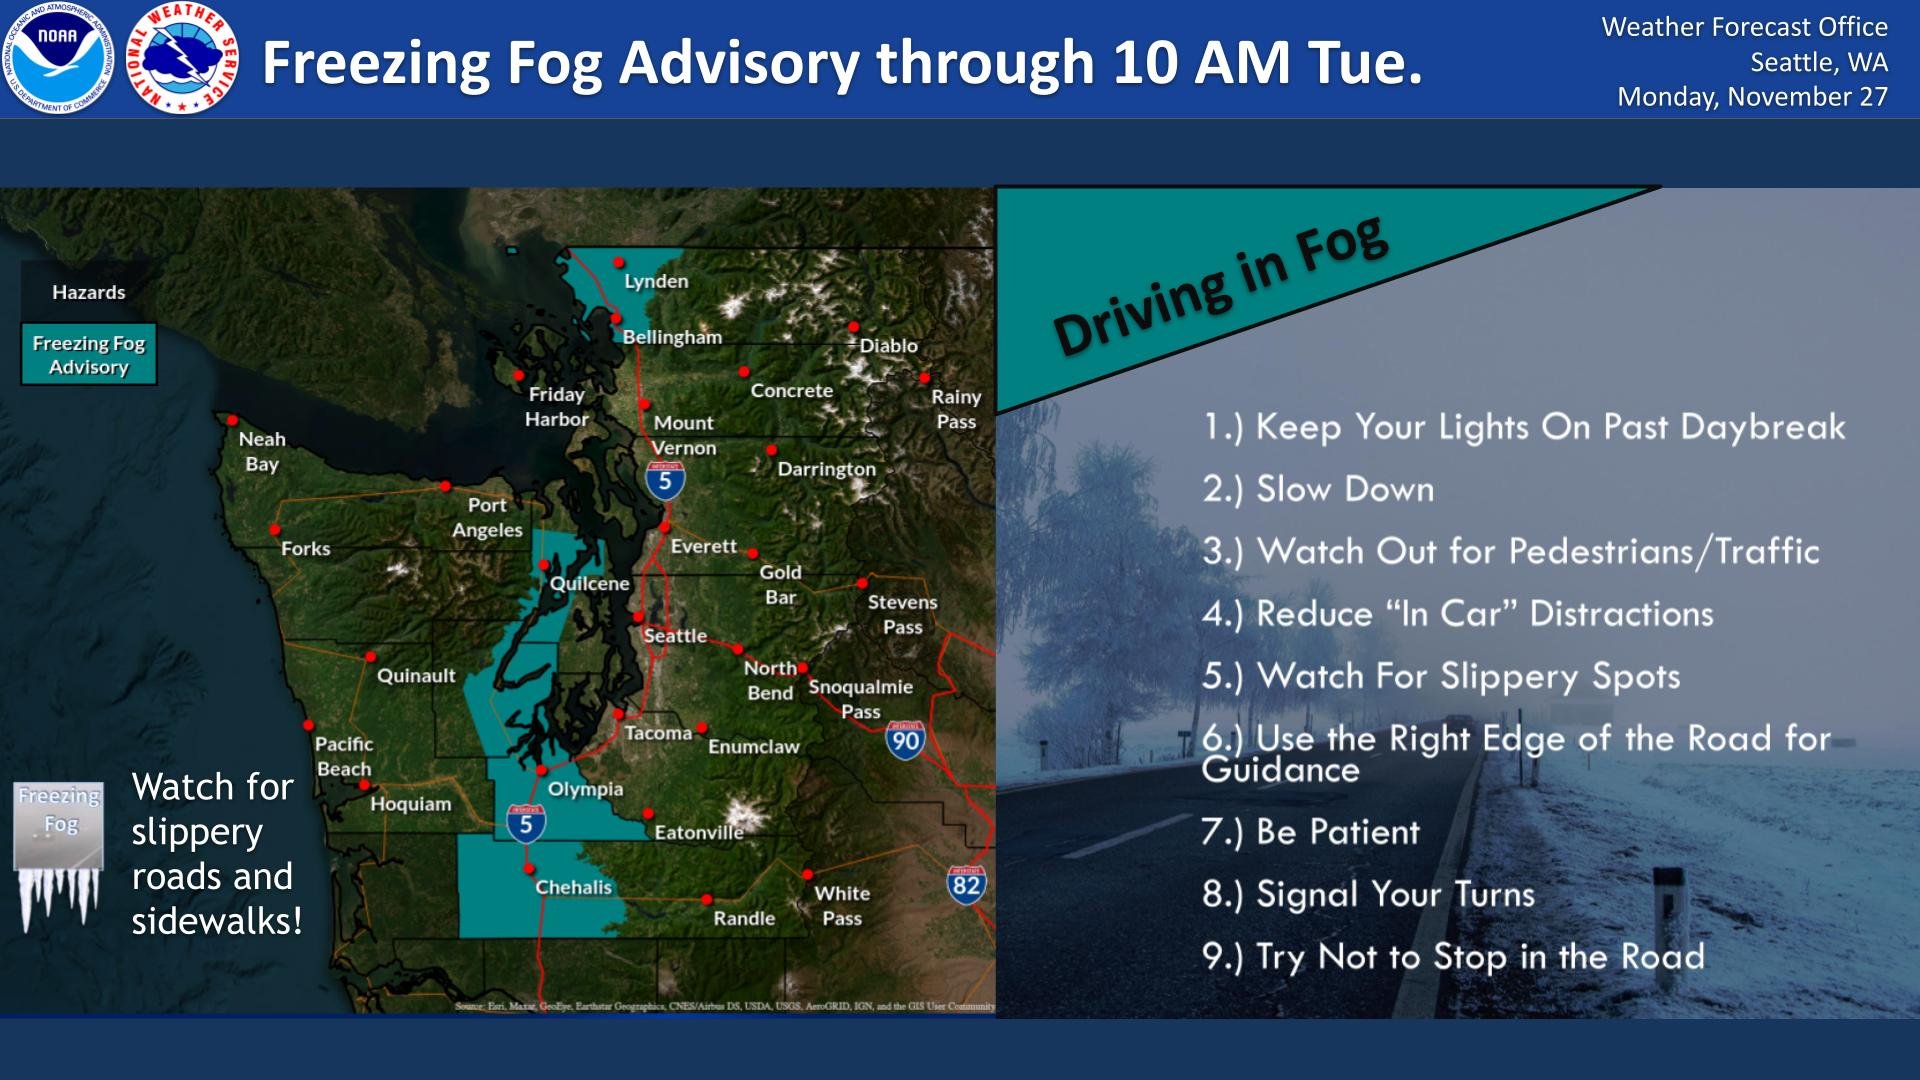 Left side of graphic displaying Freezing Fog Advisory over western Whatcom County, the Hood Canal, South Sound, and southward into western Thurston and Lewis Counties through 10 am Tuesday. Right side of graphic displays driving tips for fog including keeping driving lights on, slowing down, watching out for pedestrians, reducing "in car" distractions, watching out for slippery spots, using the right of the road for lane guidance, being patient, using turn signals, and avoiding stopping in the middle of roads.